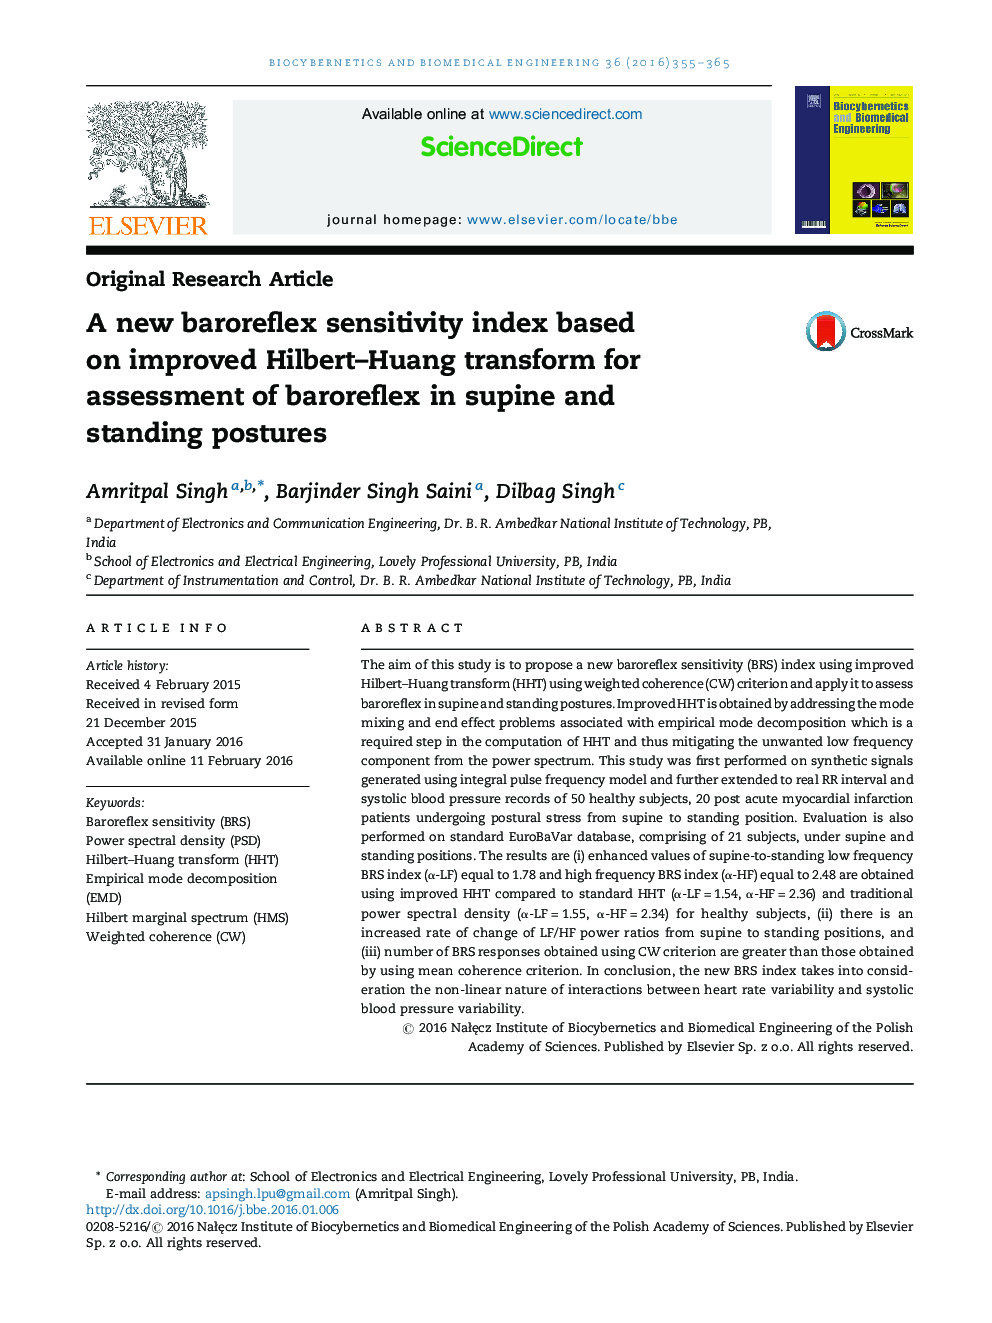 A new baroreflex sensitivity index based on improved Hilbert–Huang transform for assessment of baroreflex in supine and standing postures